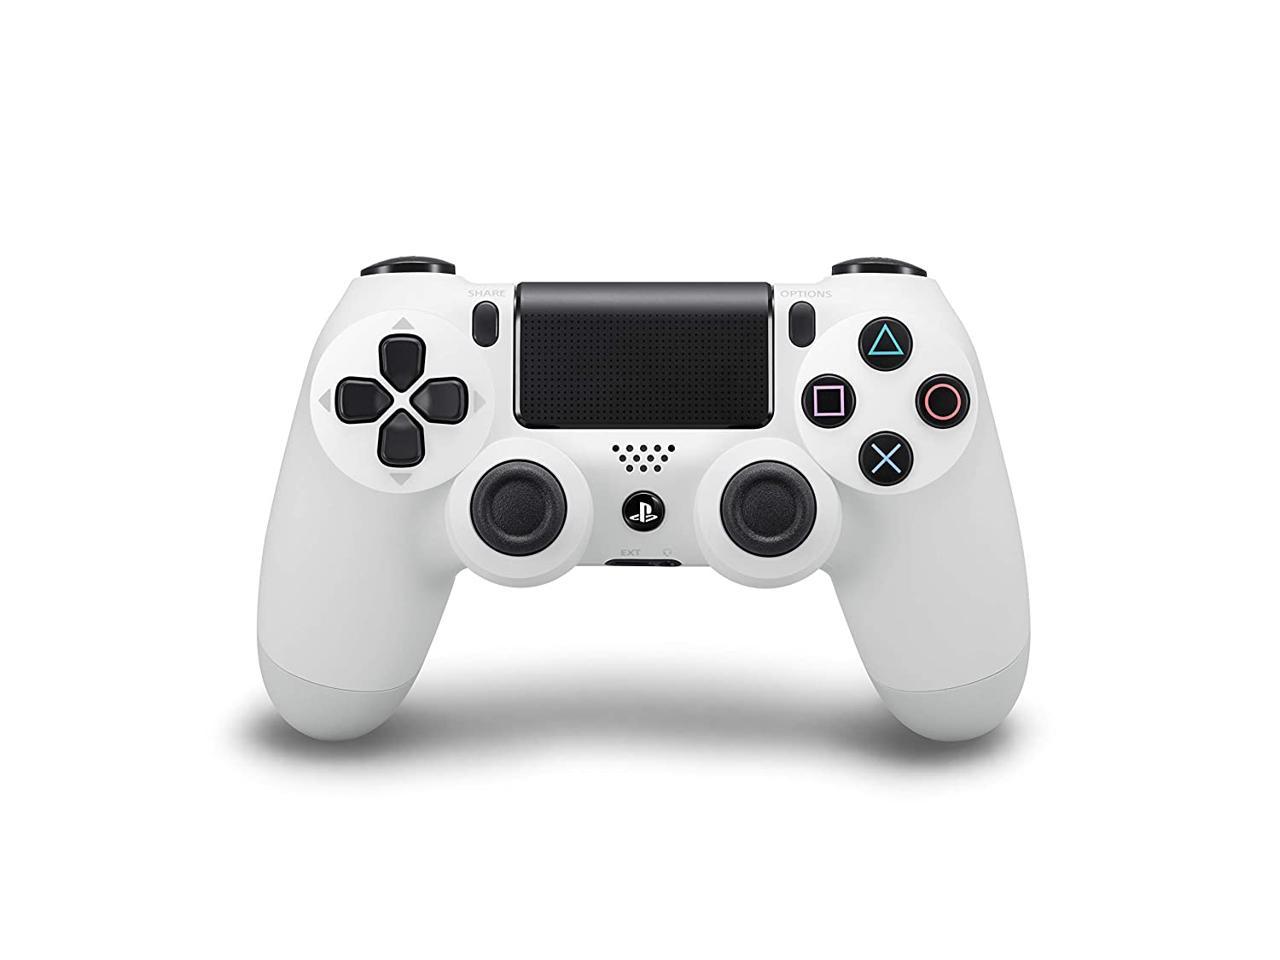 PS4 Wireless Controller Game Pad for SONY PlayStation 4 Dualshock - Glacier White,Hot PS4 Wireless Controller Game Pad for SONY PlayStation Dualshock 4 Camouflage